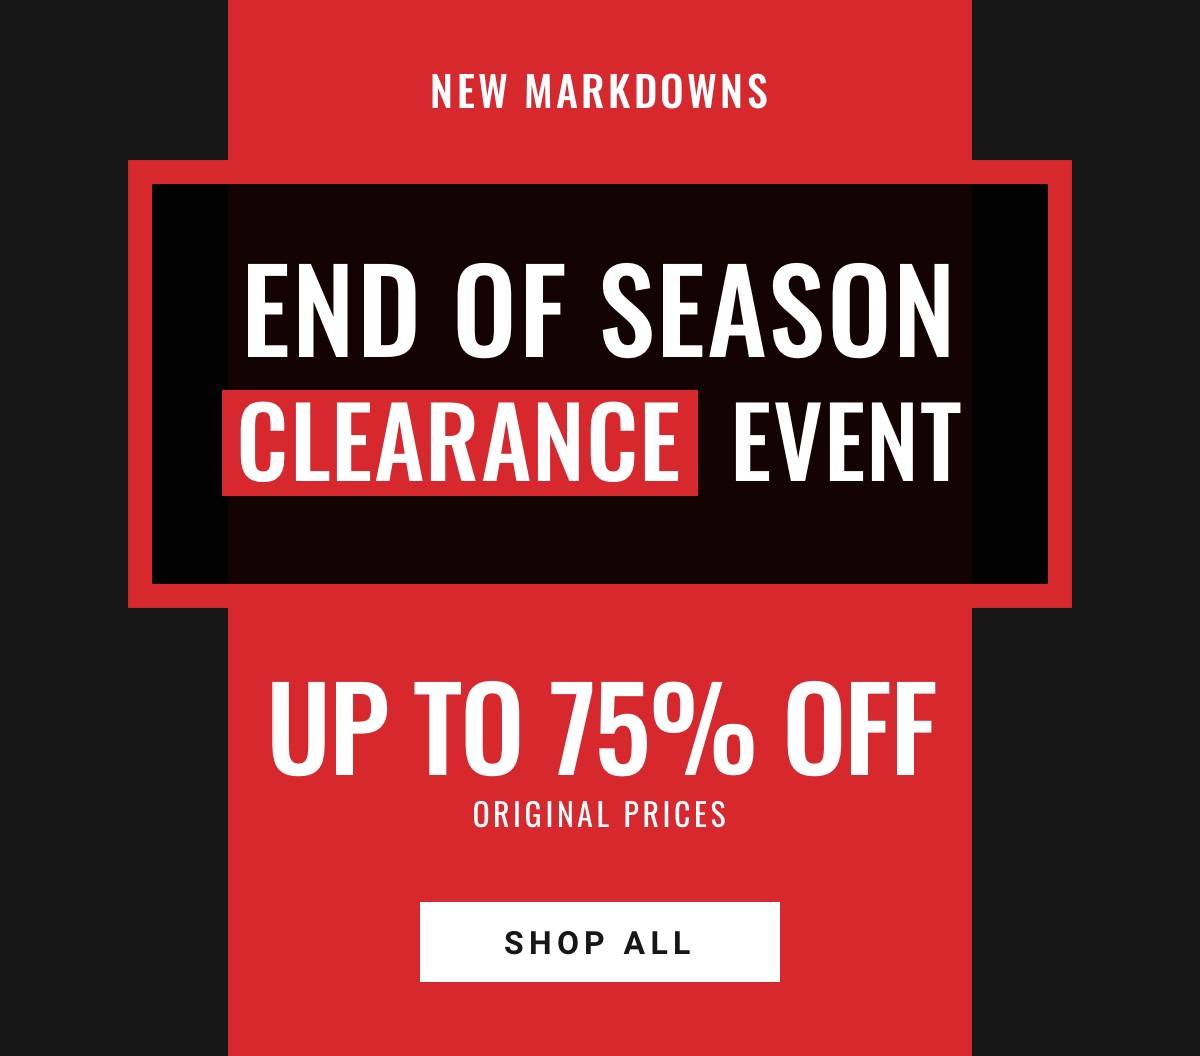 New Markdowns | End of Season Clearance Event | Up to 75% Off Original Prices - Shop All